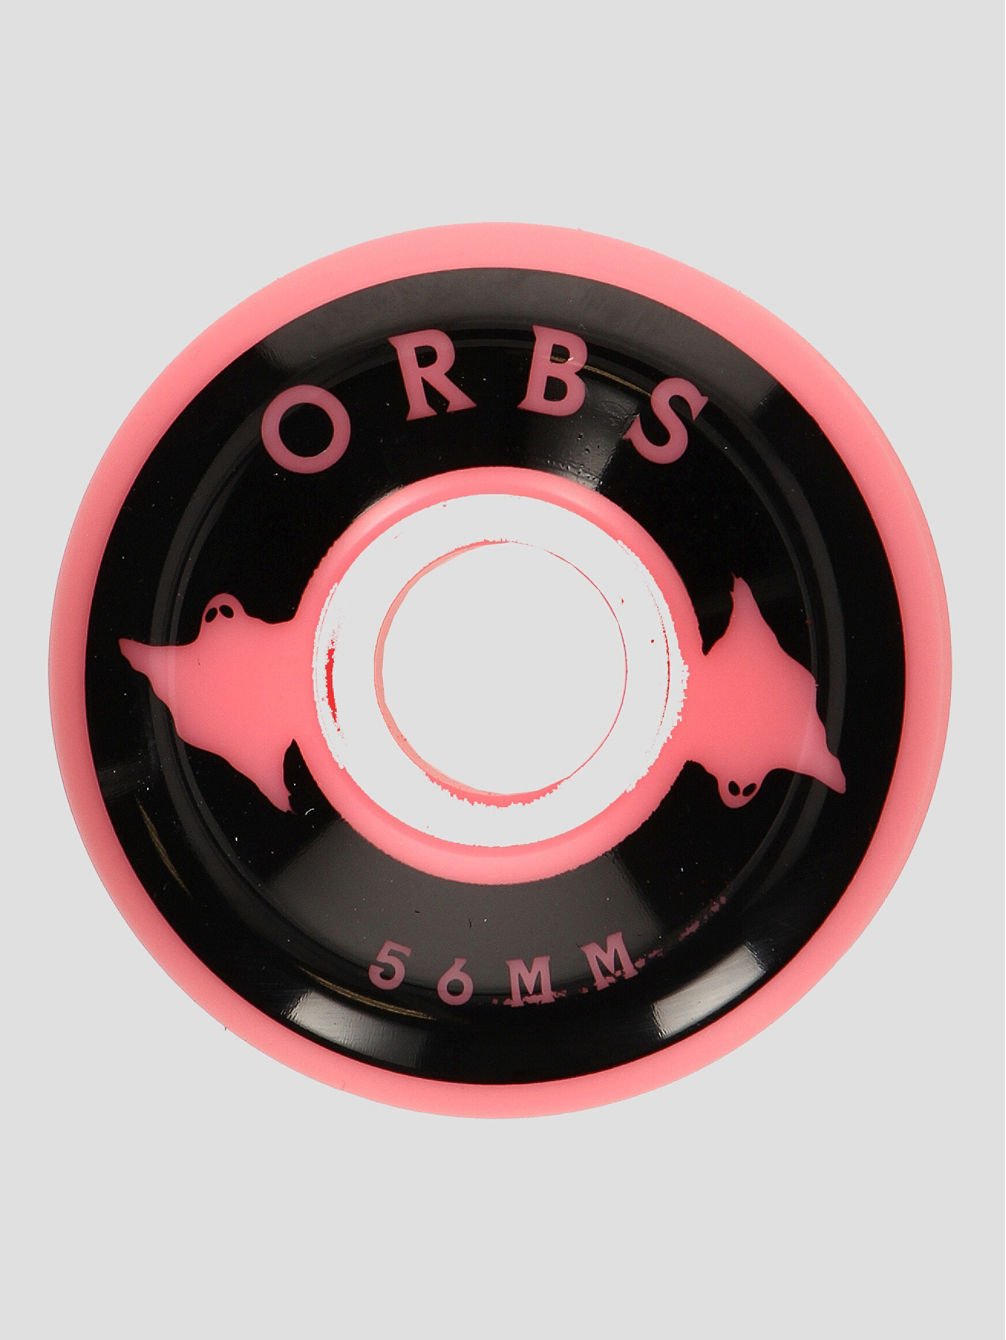 Orbs Specters - Conical - 99A 56mm Hjul